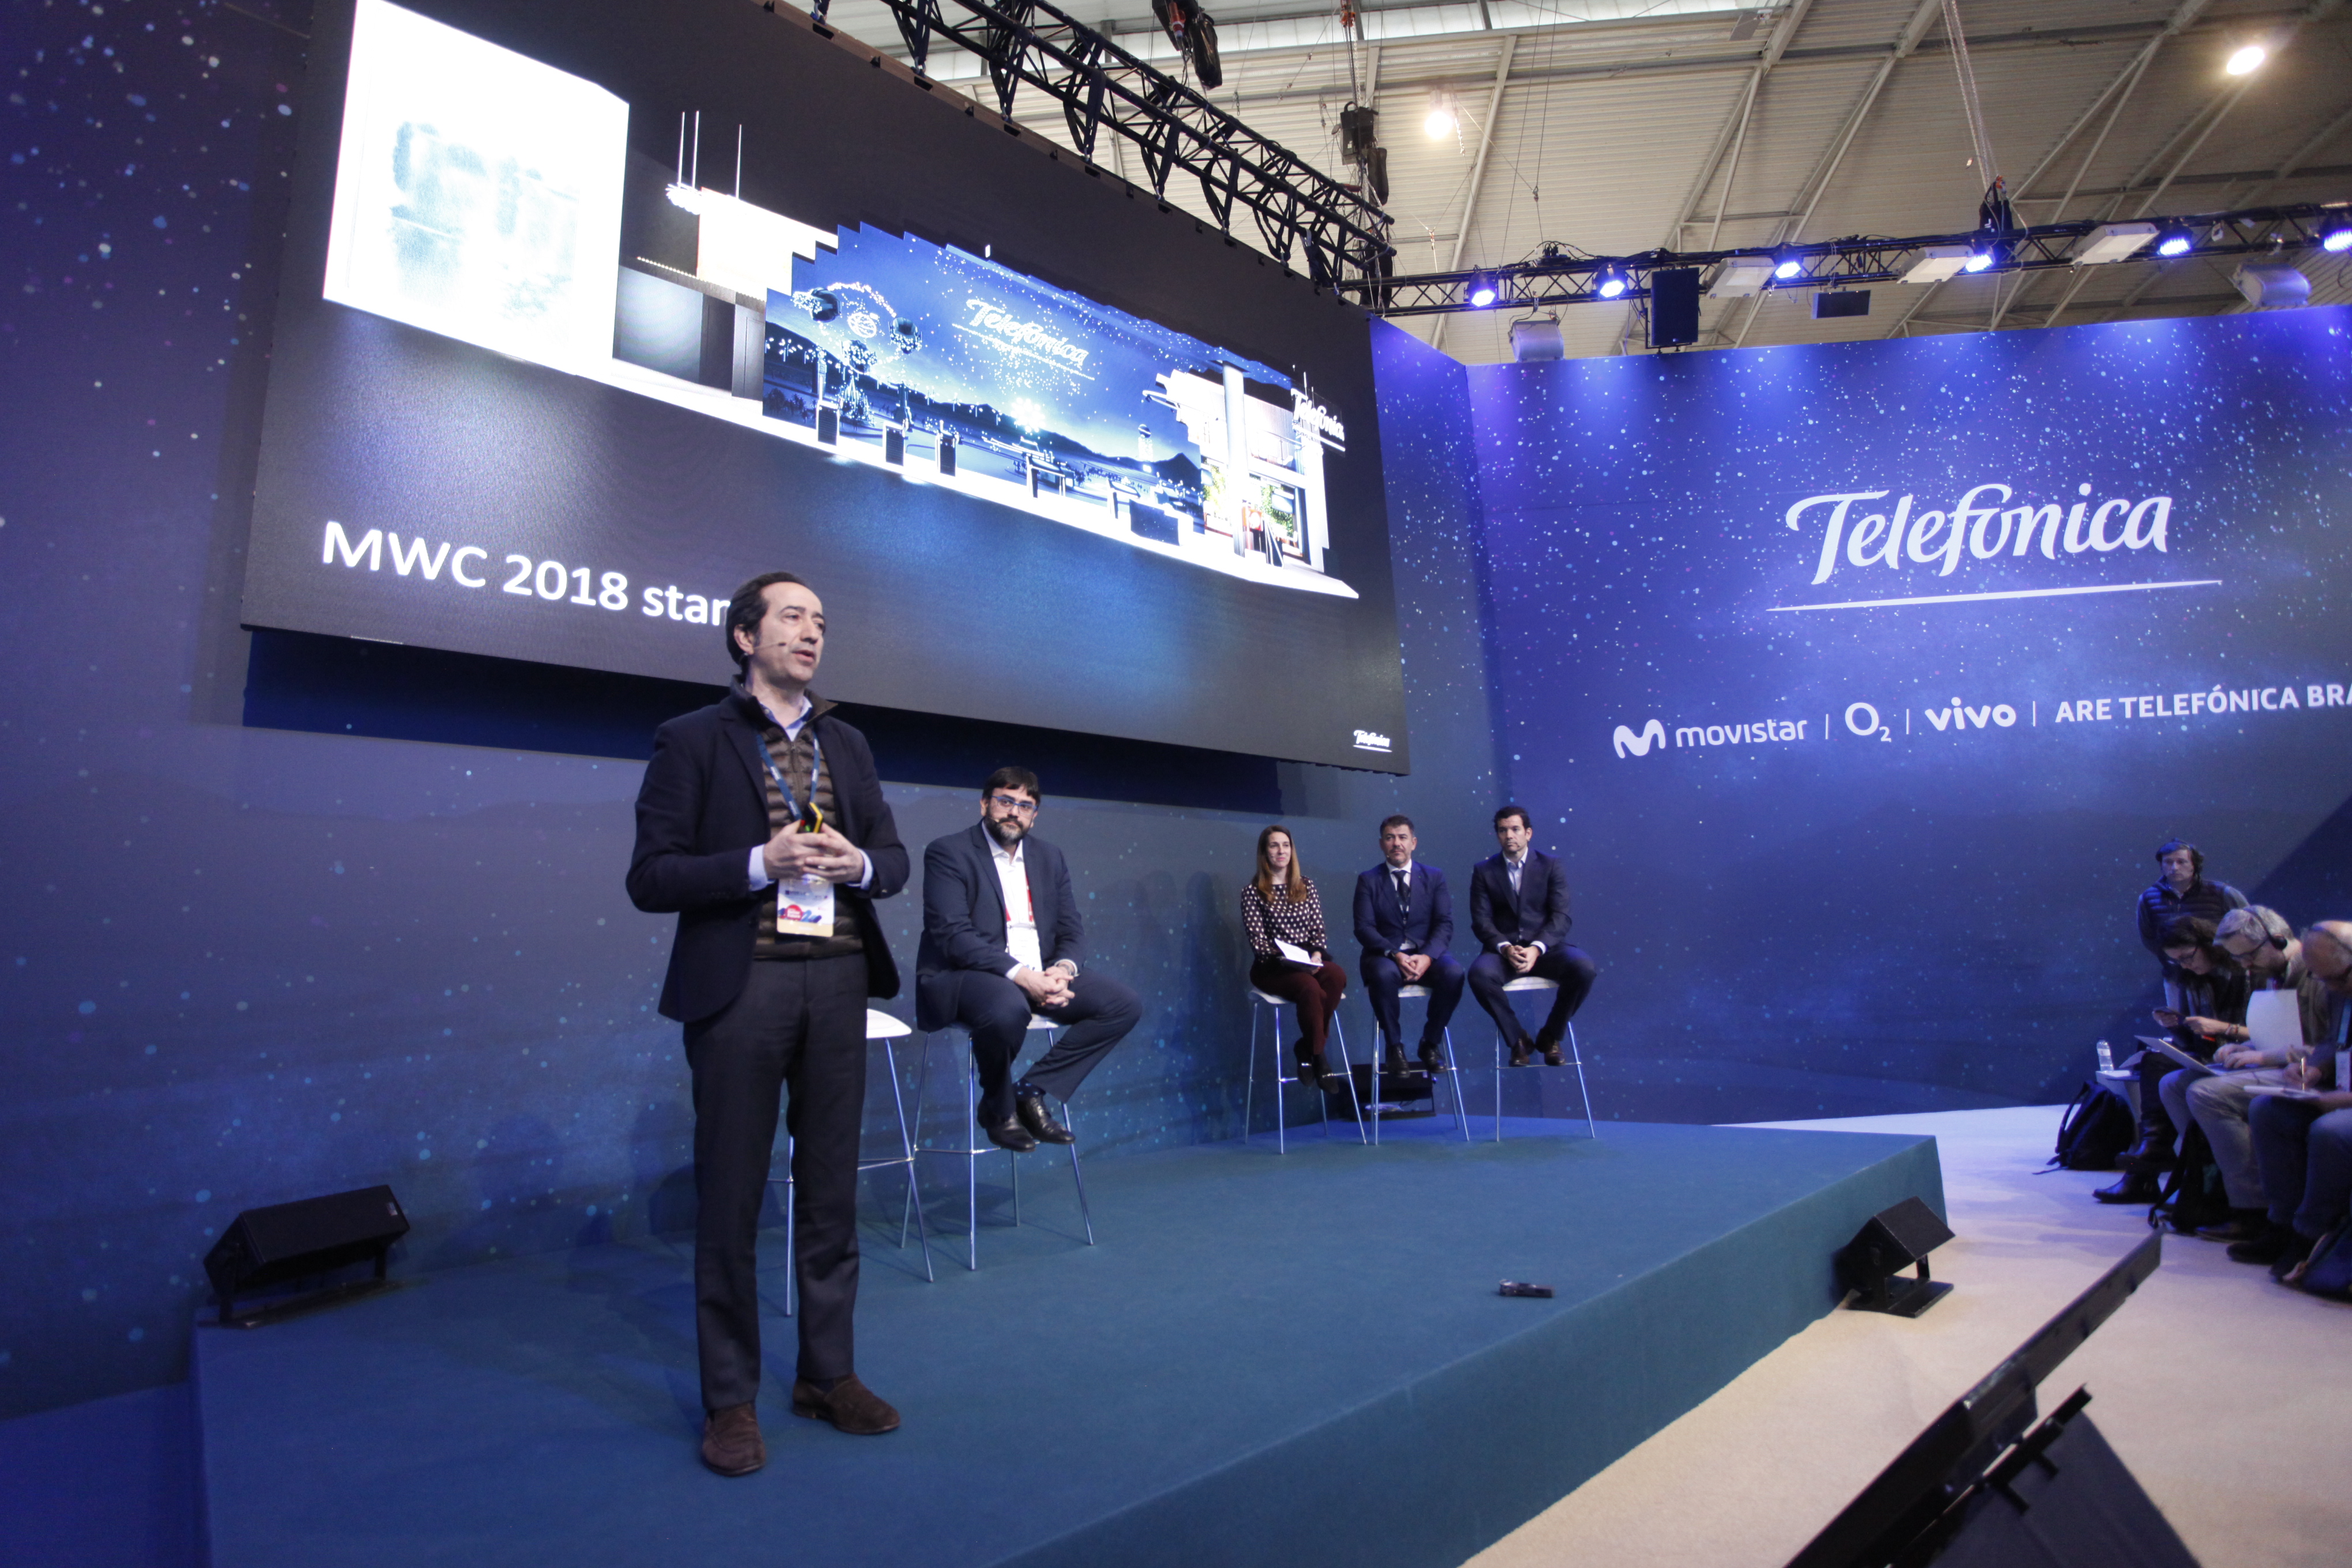 Vicente Muñoz, Telefónica's Chief IoT Officer, talking about advantages of digitalisation of industry